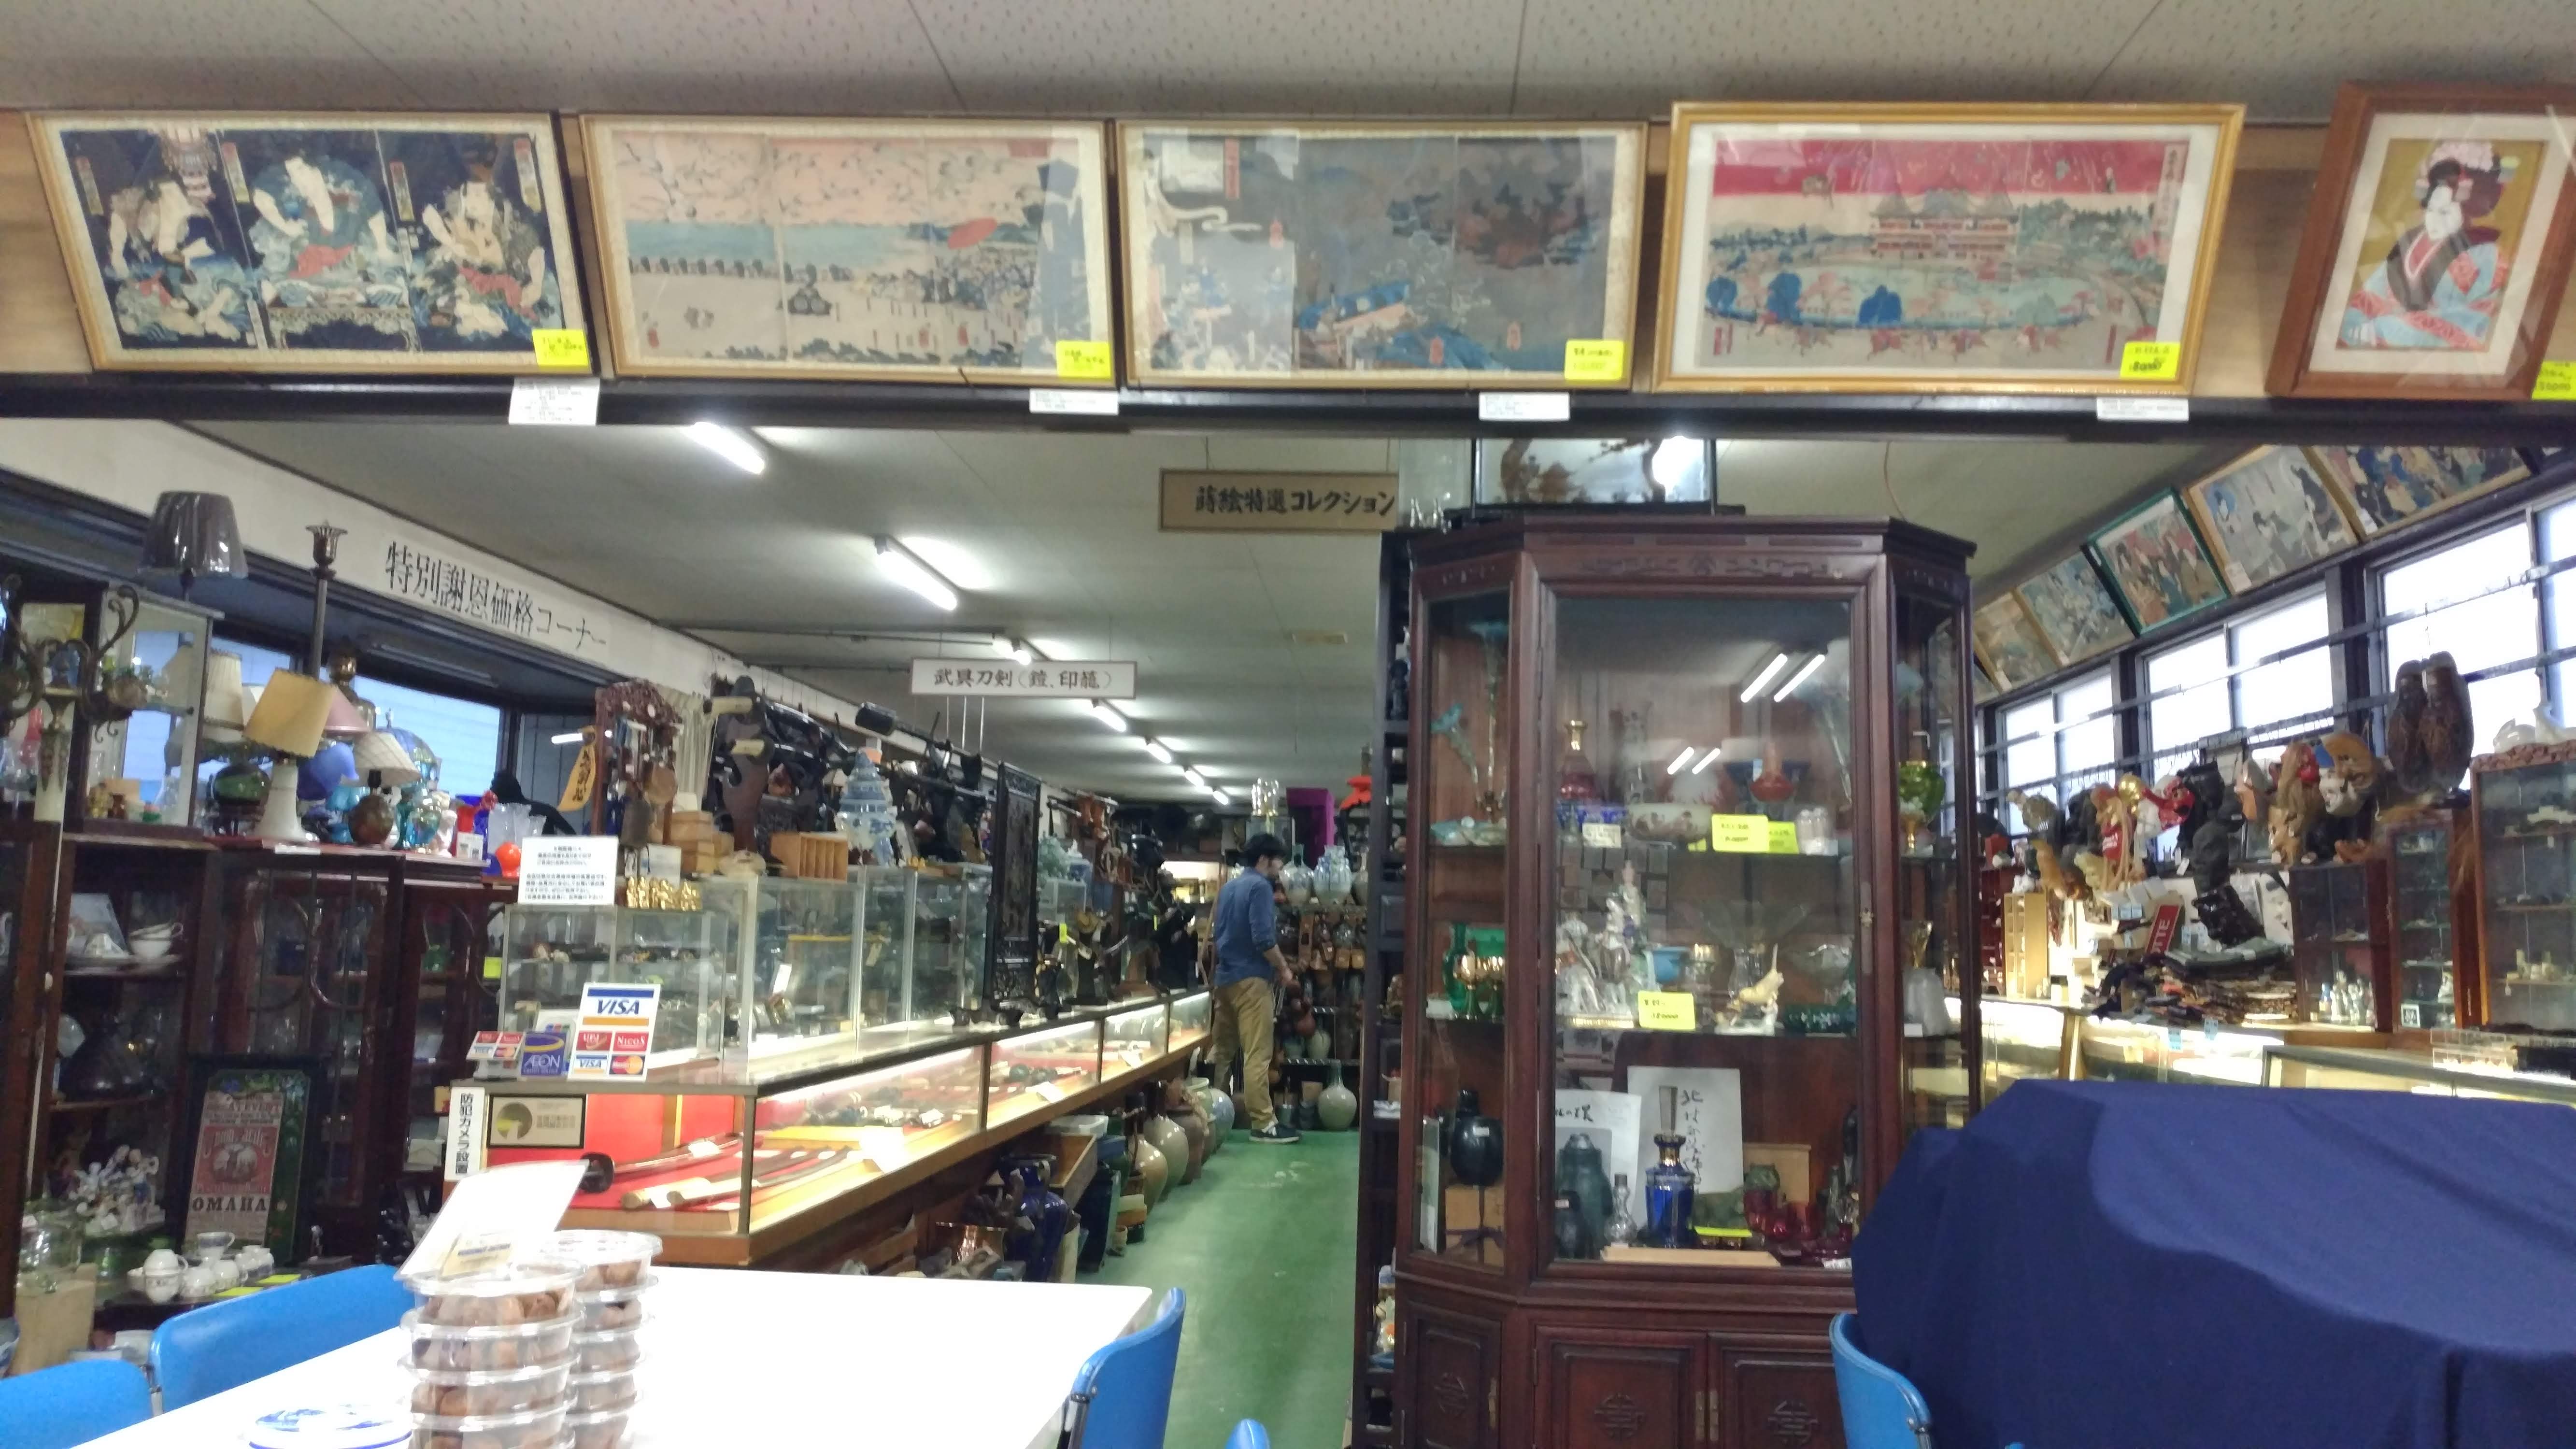 the shop interior with display cases running along the walls and down the middle.  Artwork is displayed on a ledge on the angled ceiling